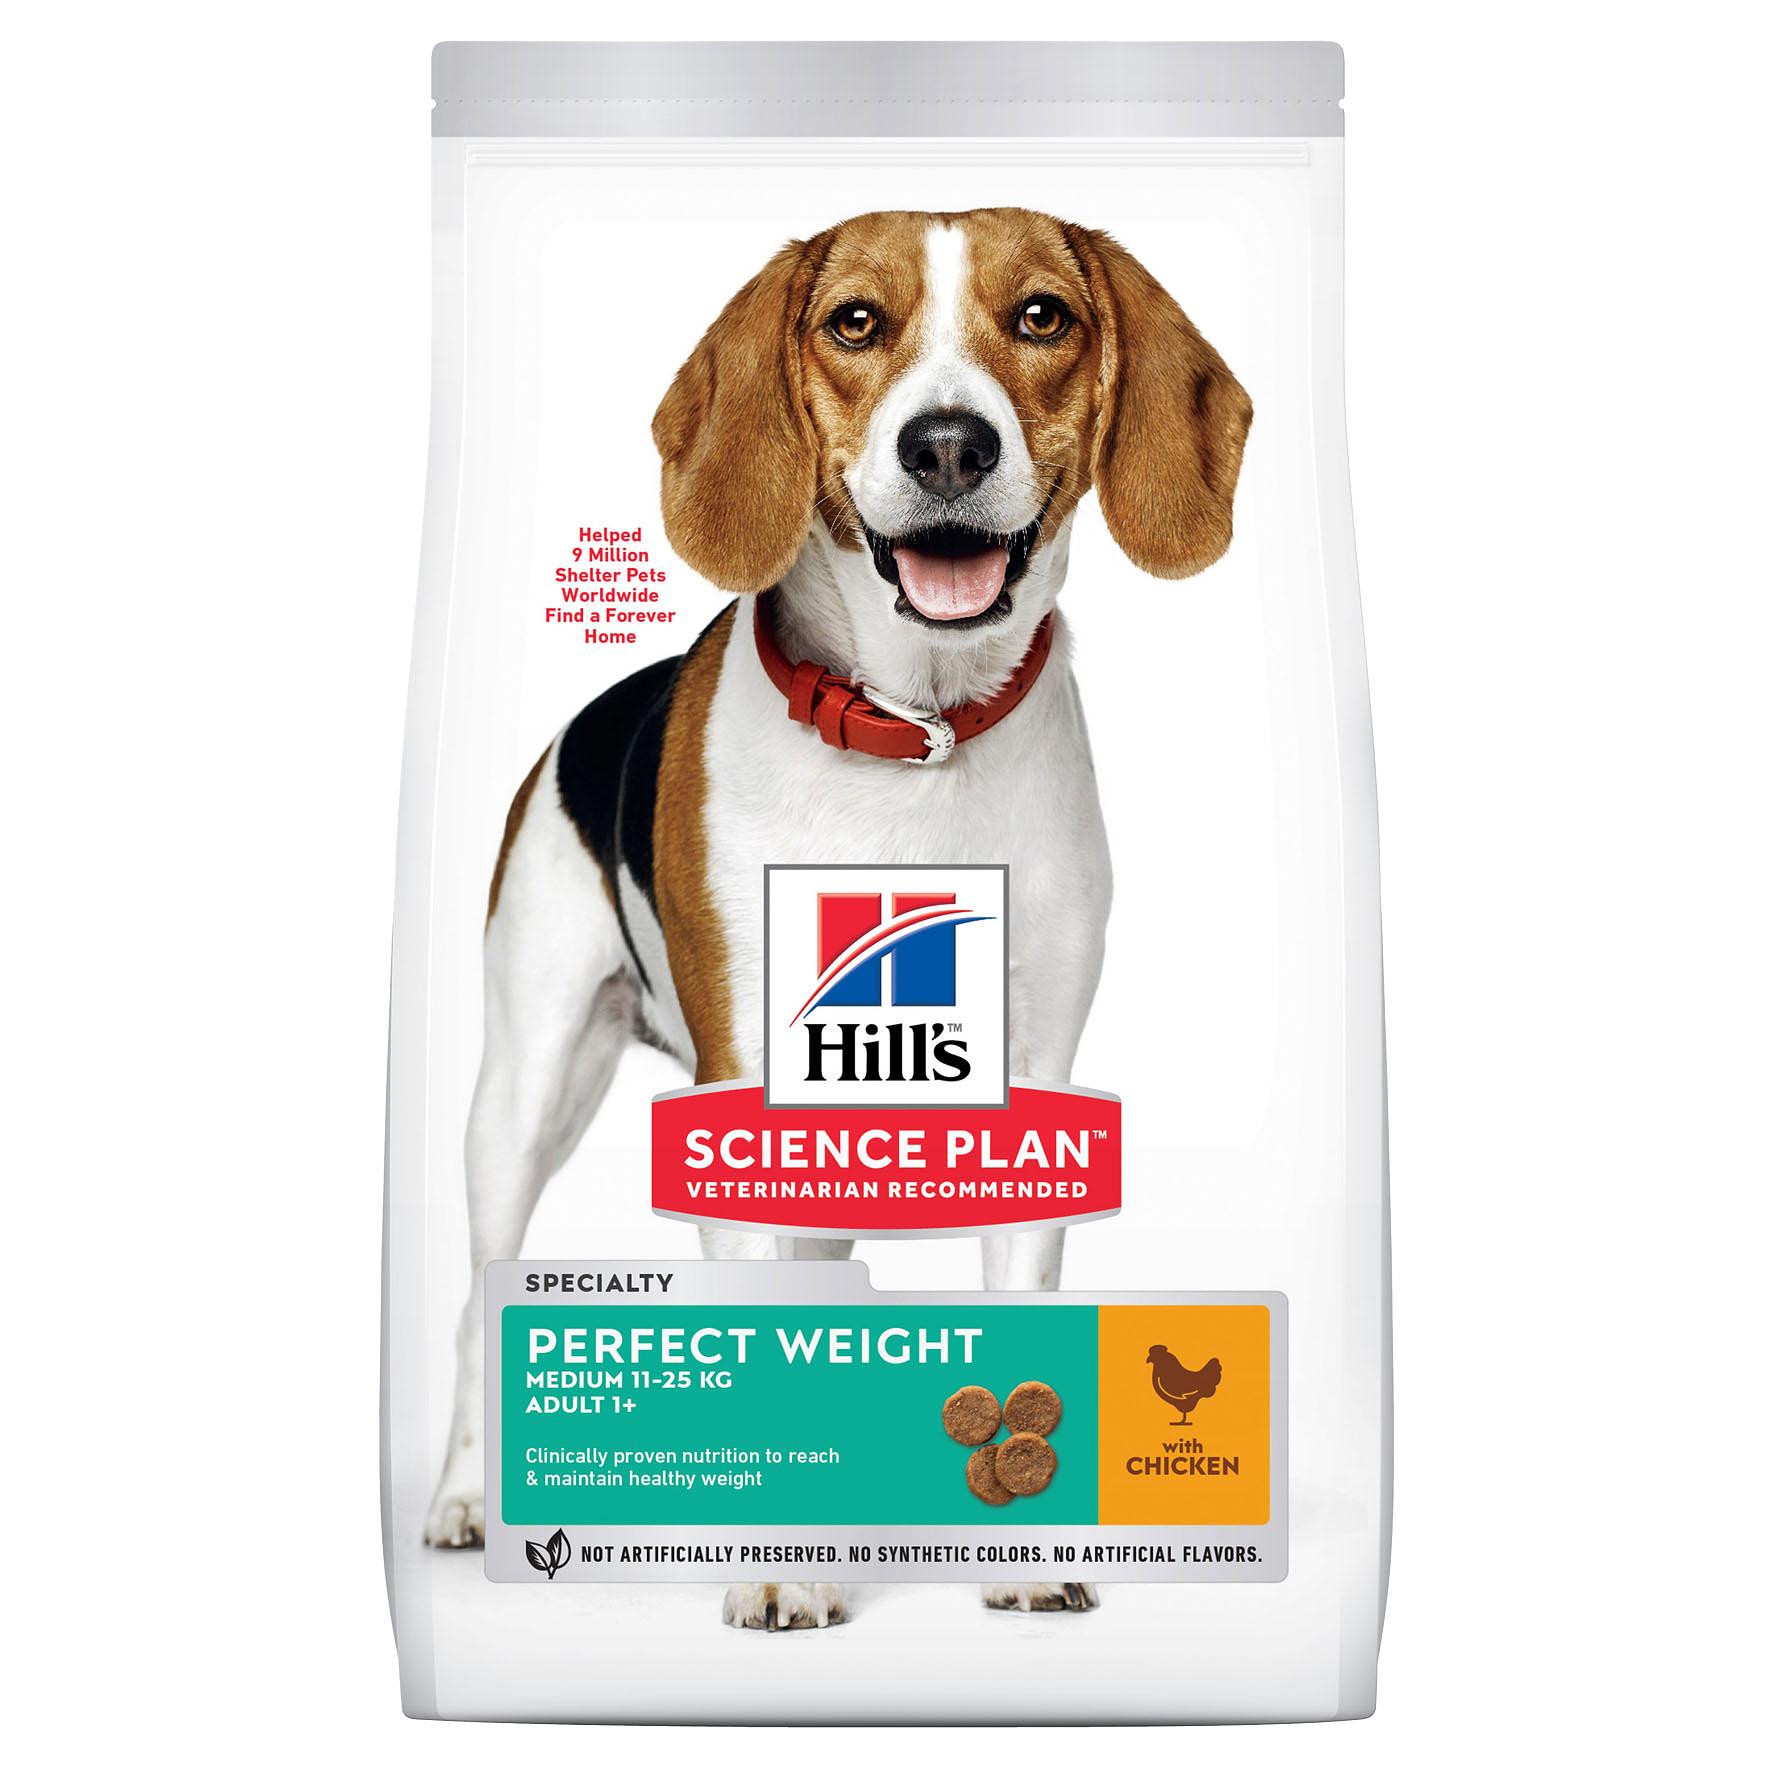 Hill's Science Plan Adult Perfect Weight, Medium, Chicken